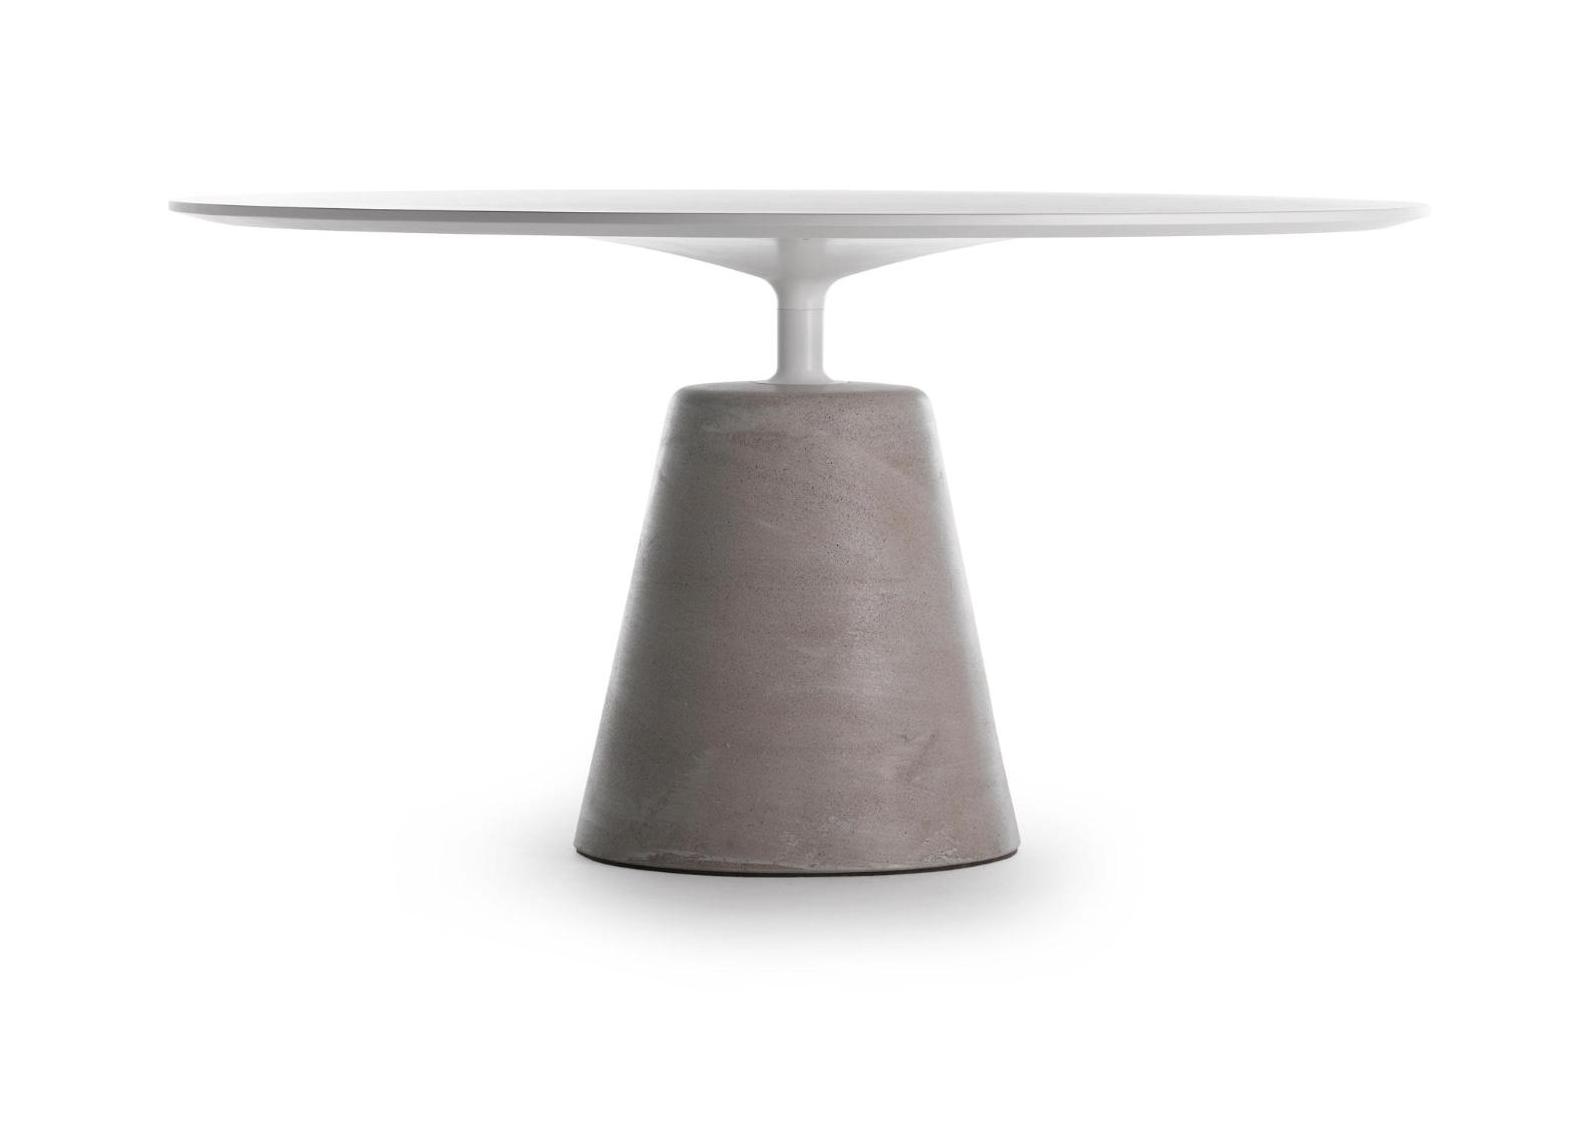 Rock Italian Indoor / Outdoor Table ☞ Structure: Cement Natural X080 ☞ Top: Matt Lacquered - White X042 ☞ Dimensions: Ø 120 cm